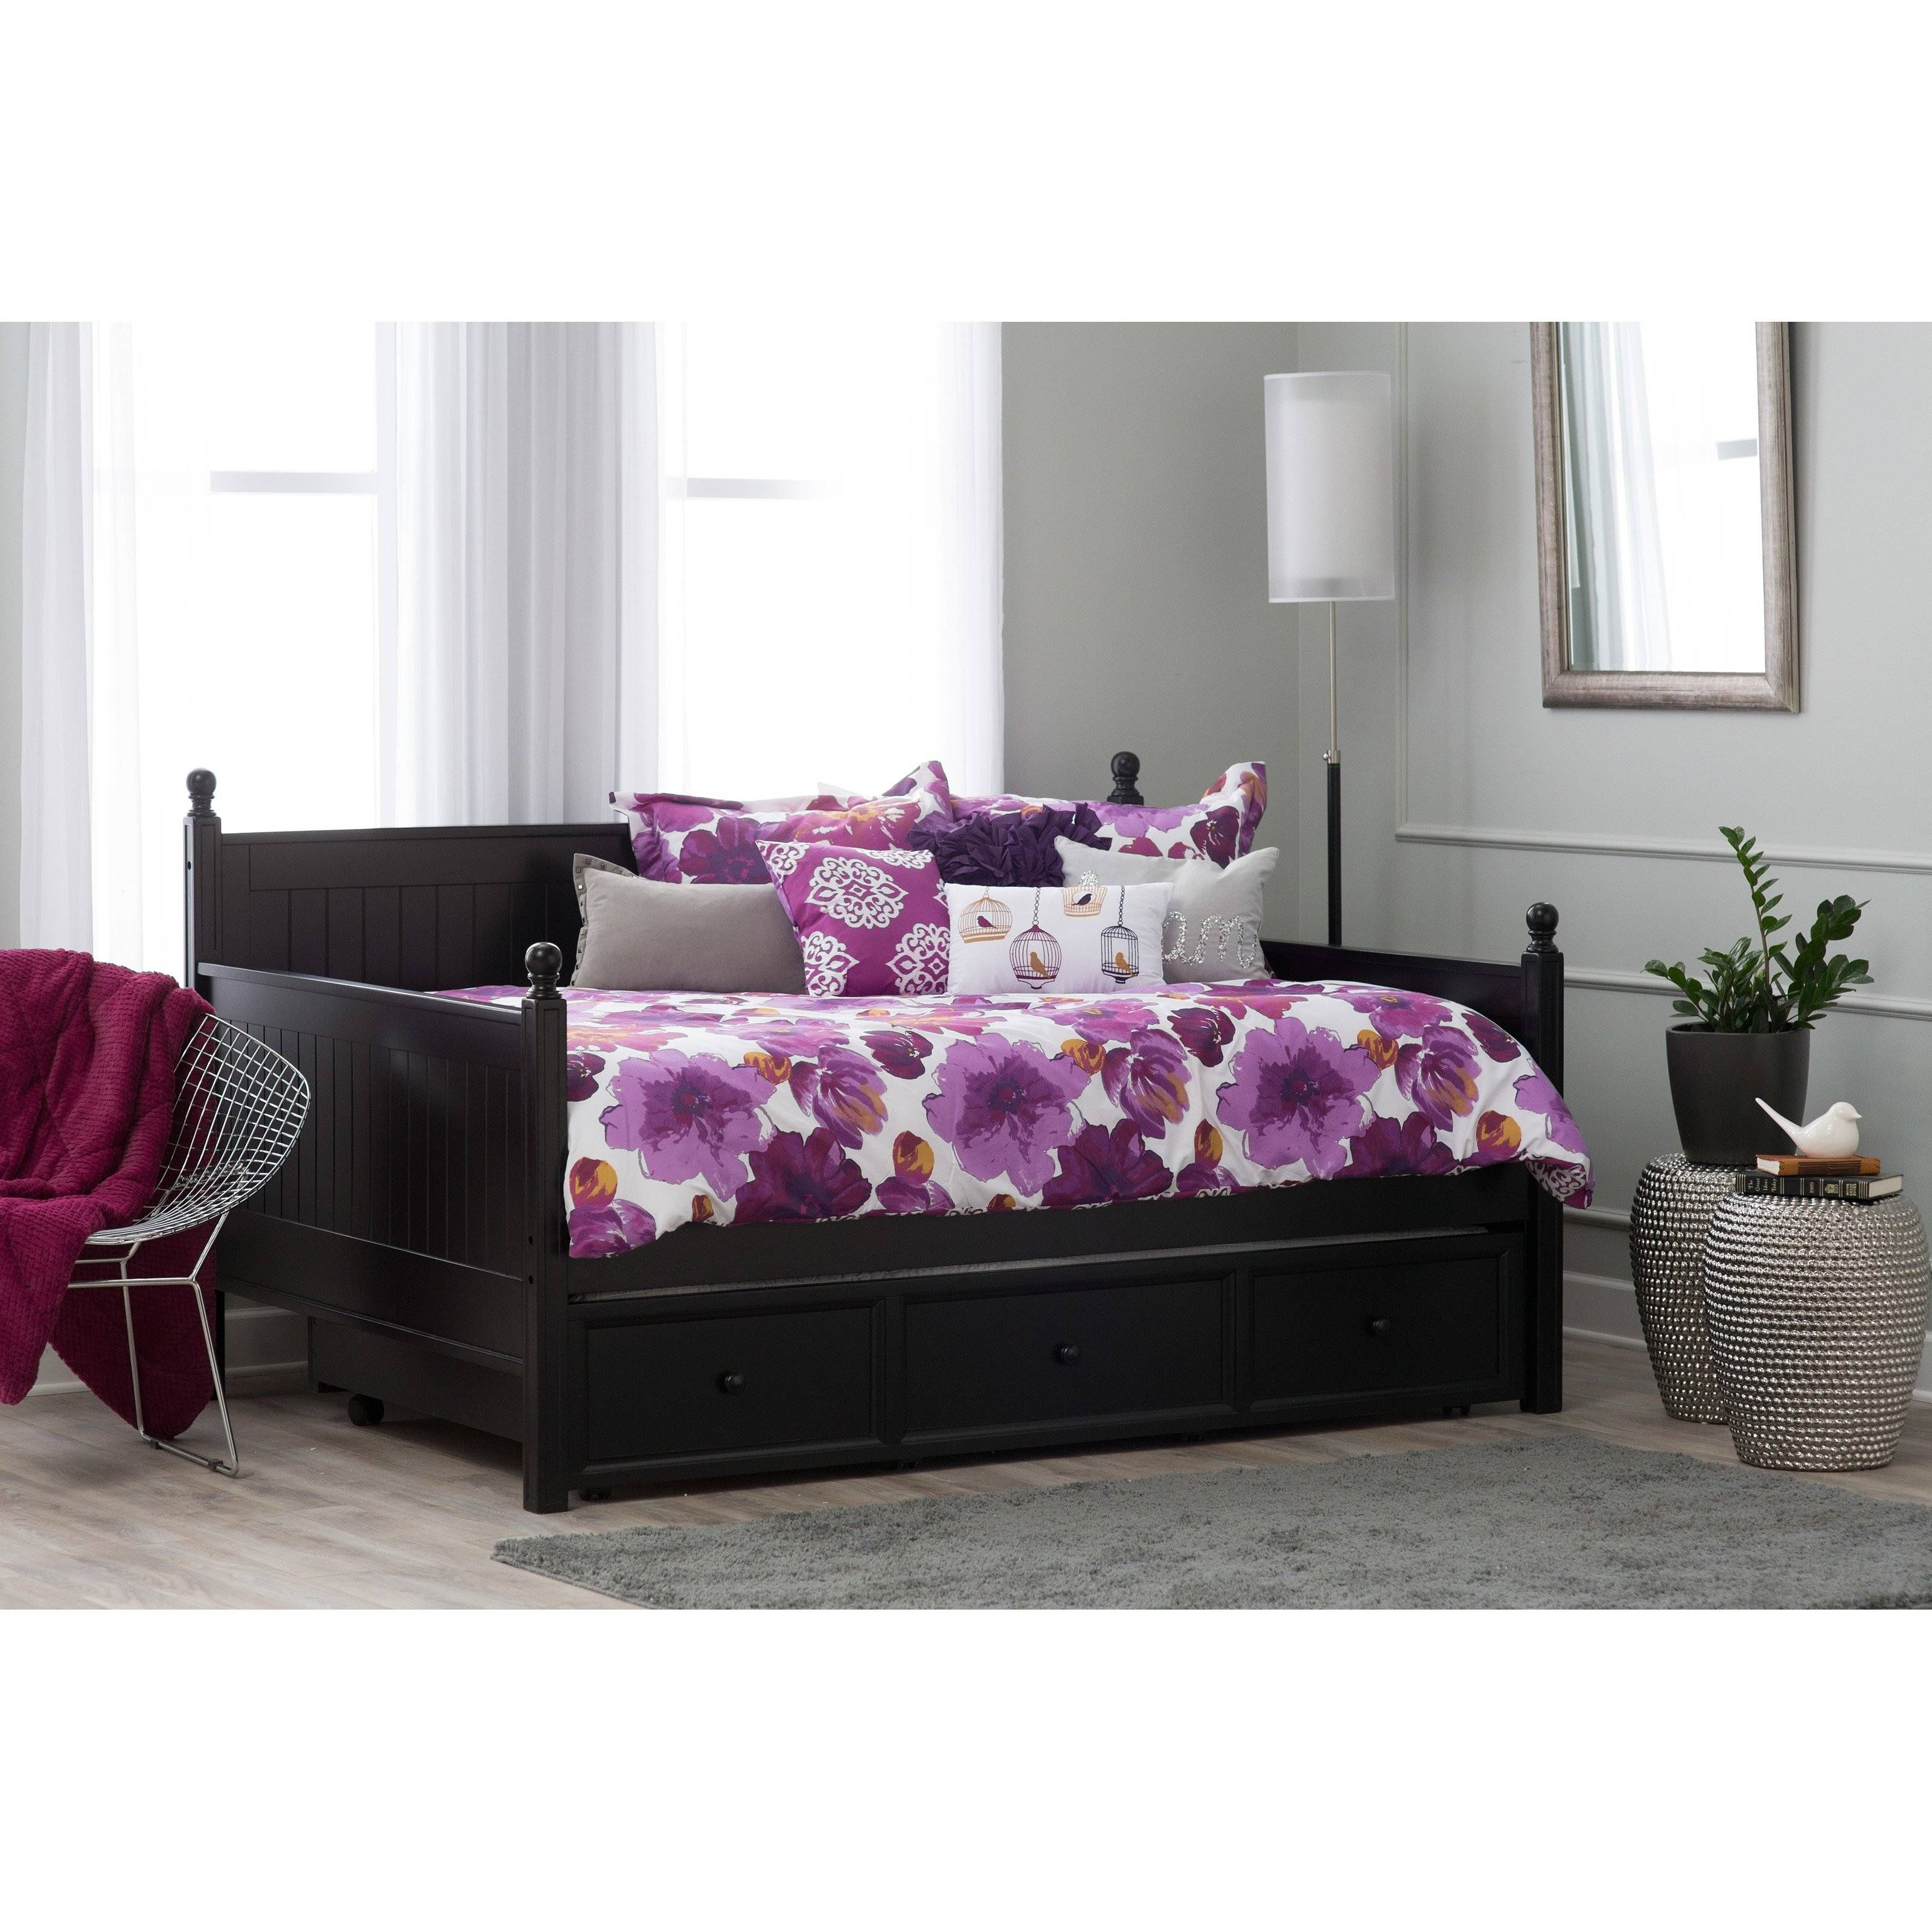 Daybeds On Hayneedle – Best Daybed Selection For Sale In Sofa Day Beds (View 23 of 30)